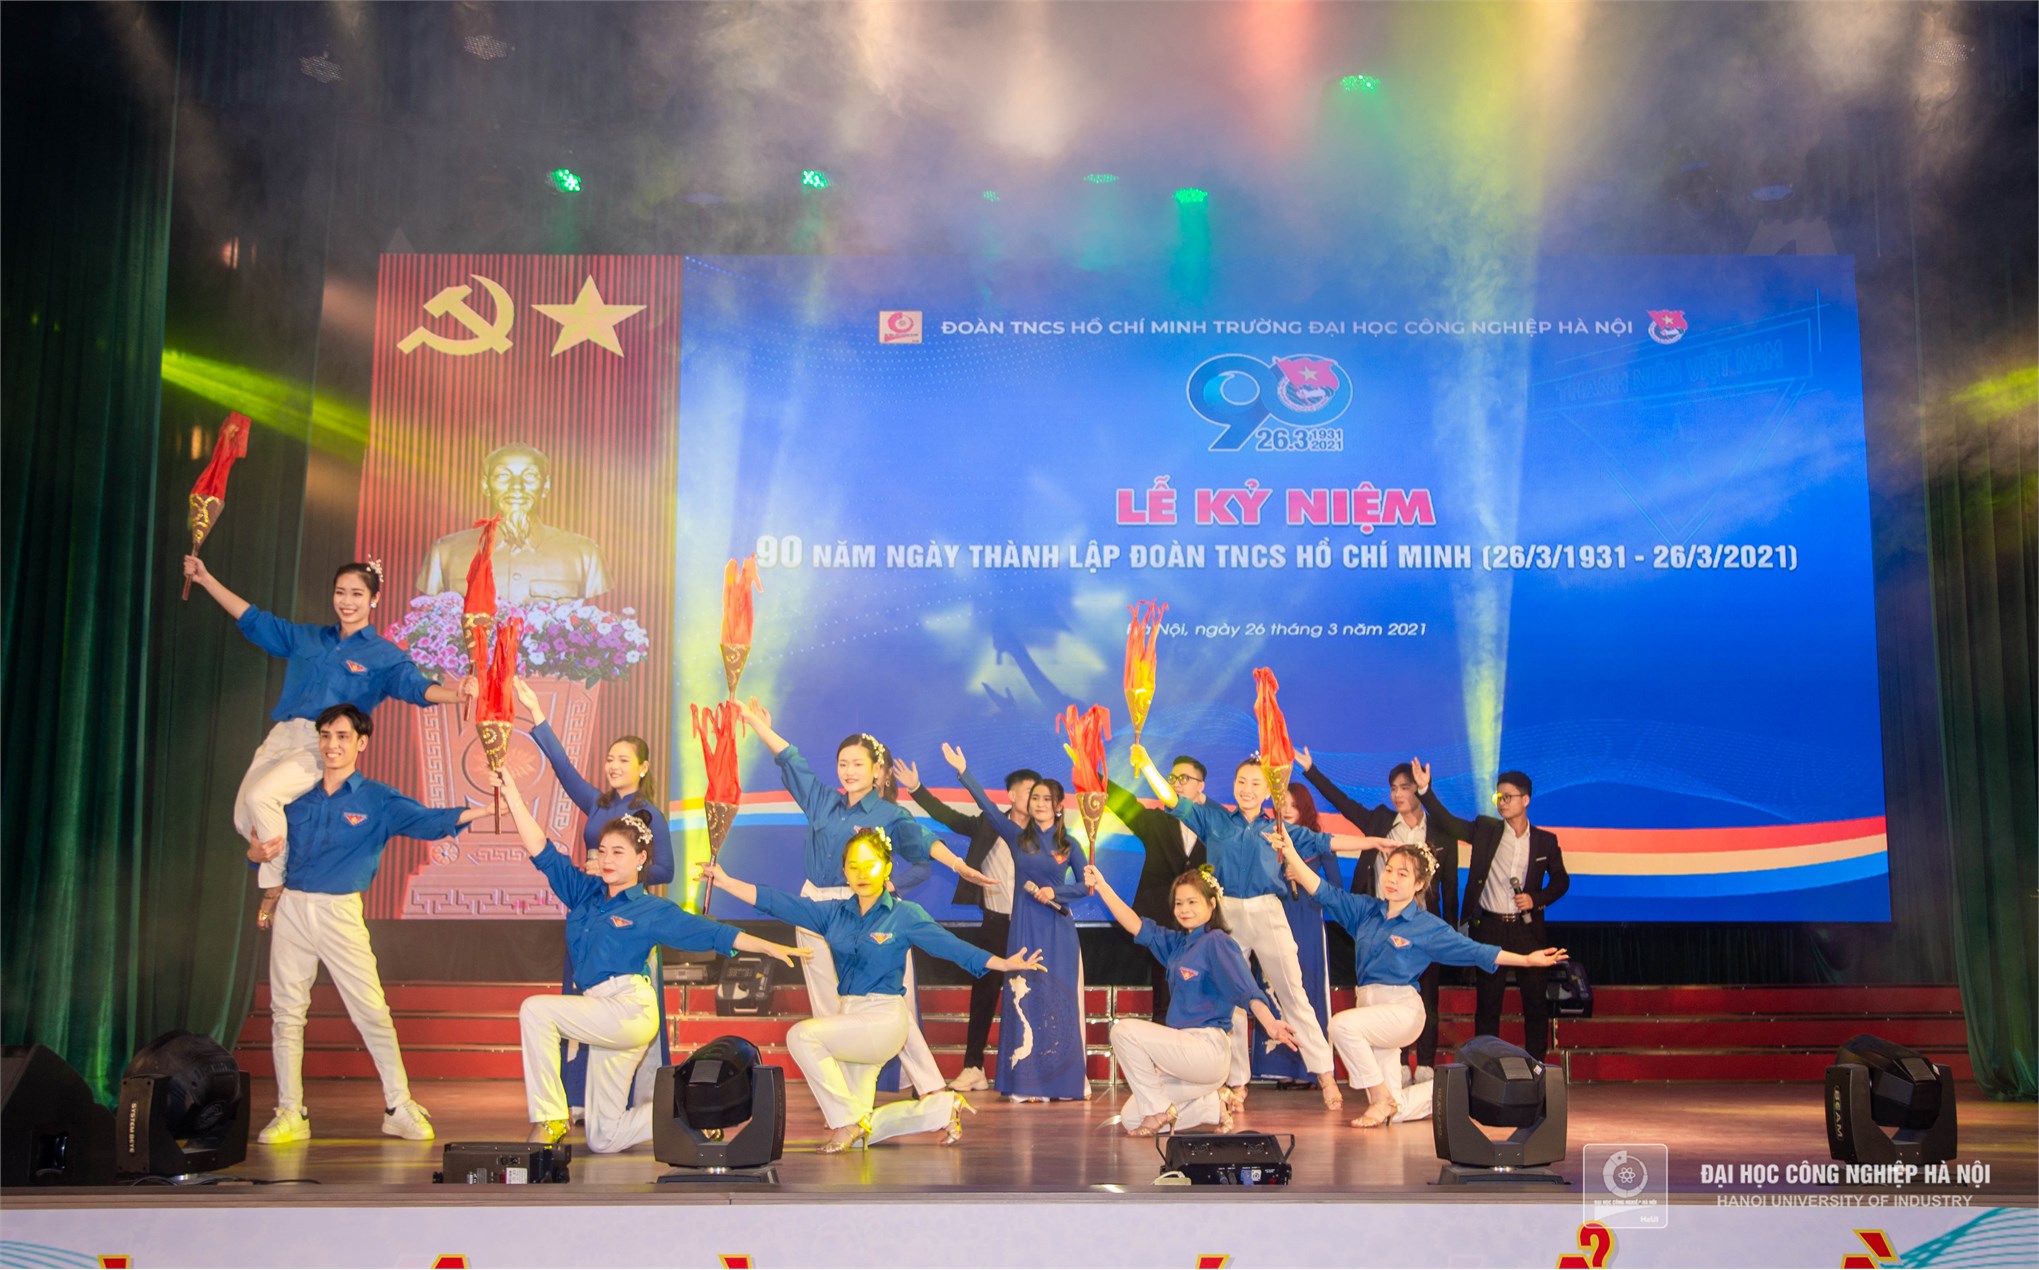 Youth Union’s 90th founding anniversary celebrated